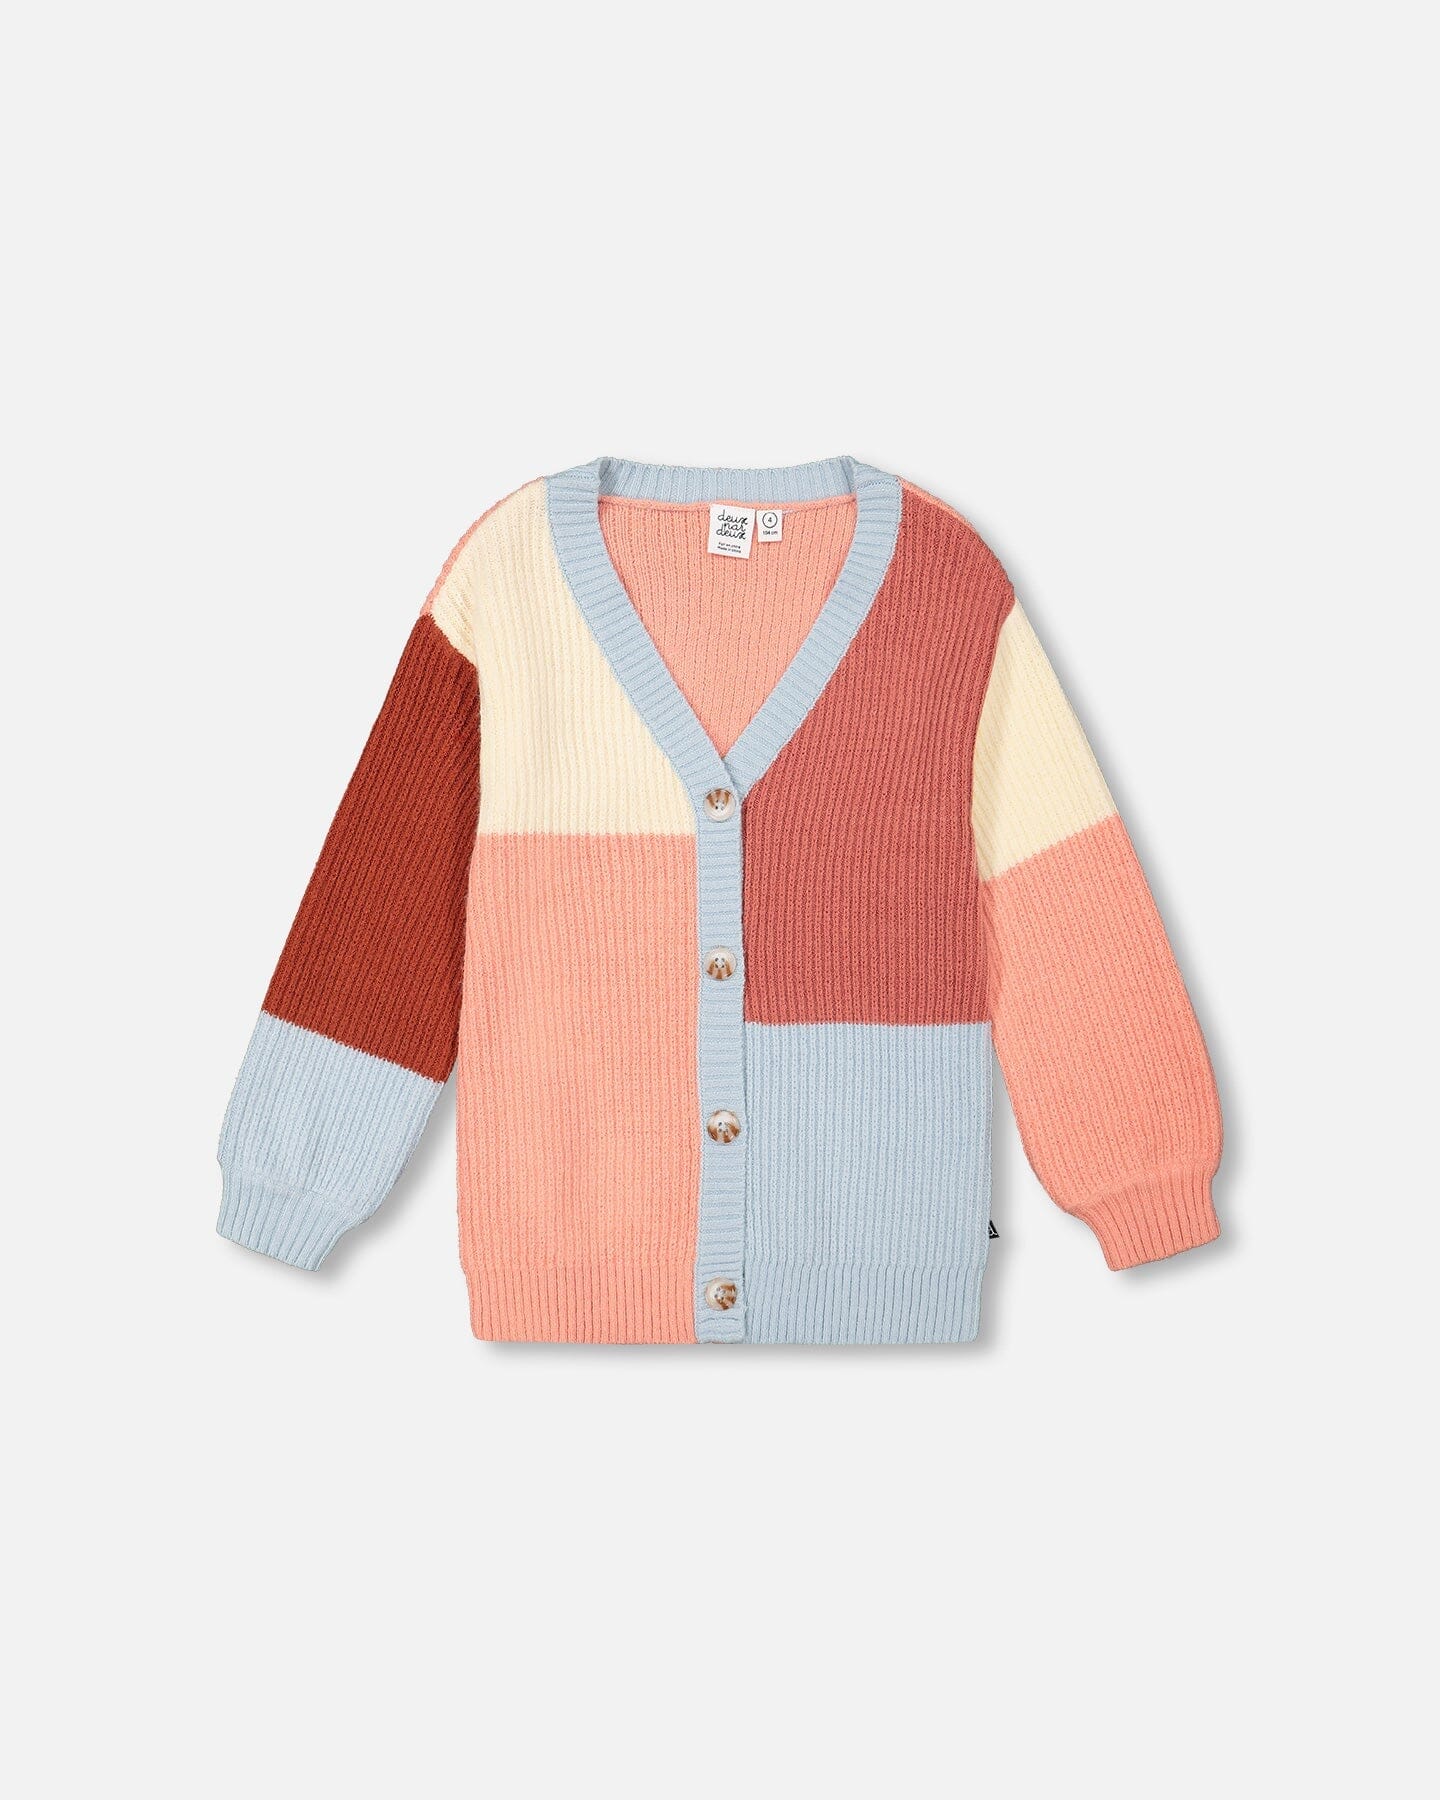 Color Block Knitted Cardigan Salmon Pink, Sky, Terra Cotta - F20KT32_000